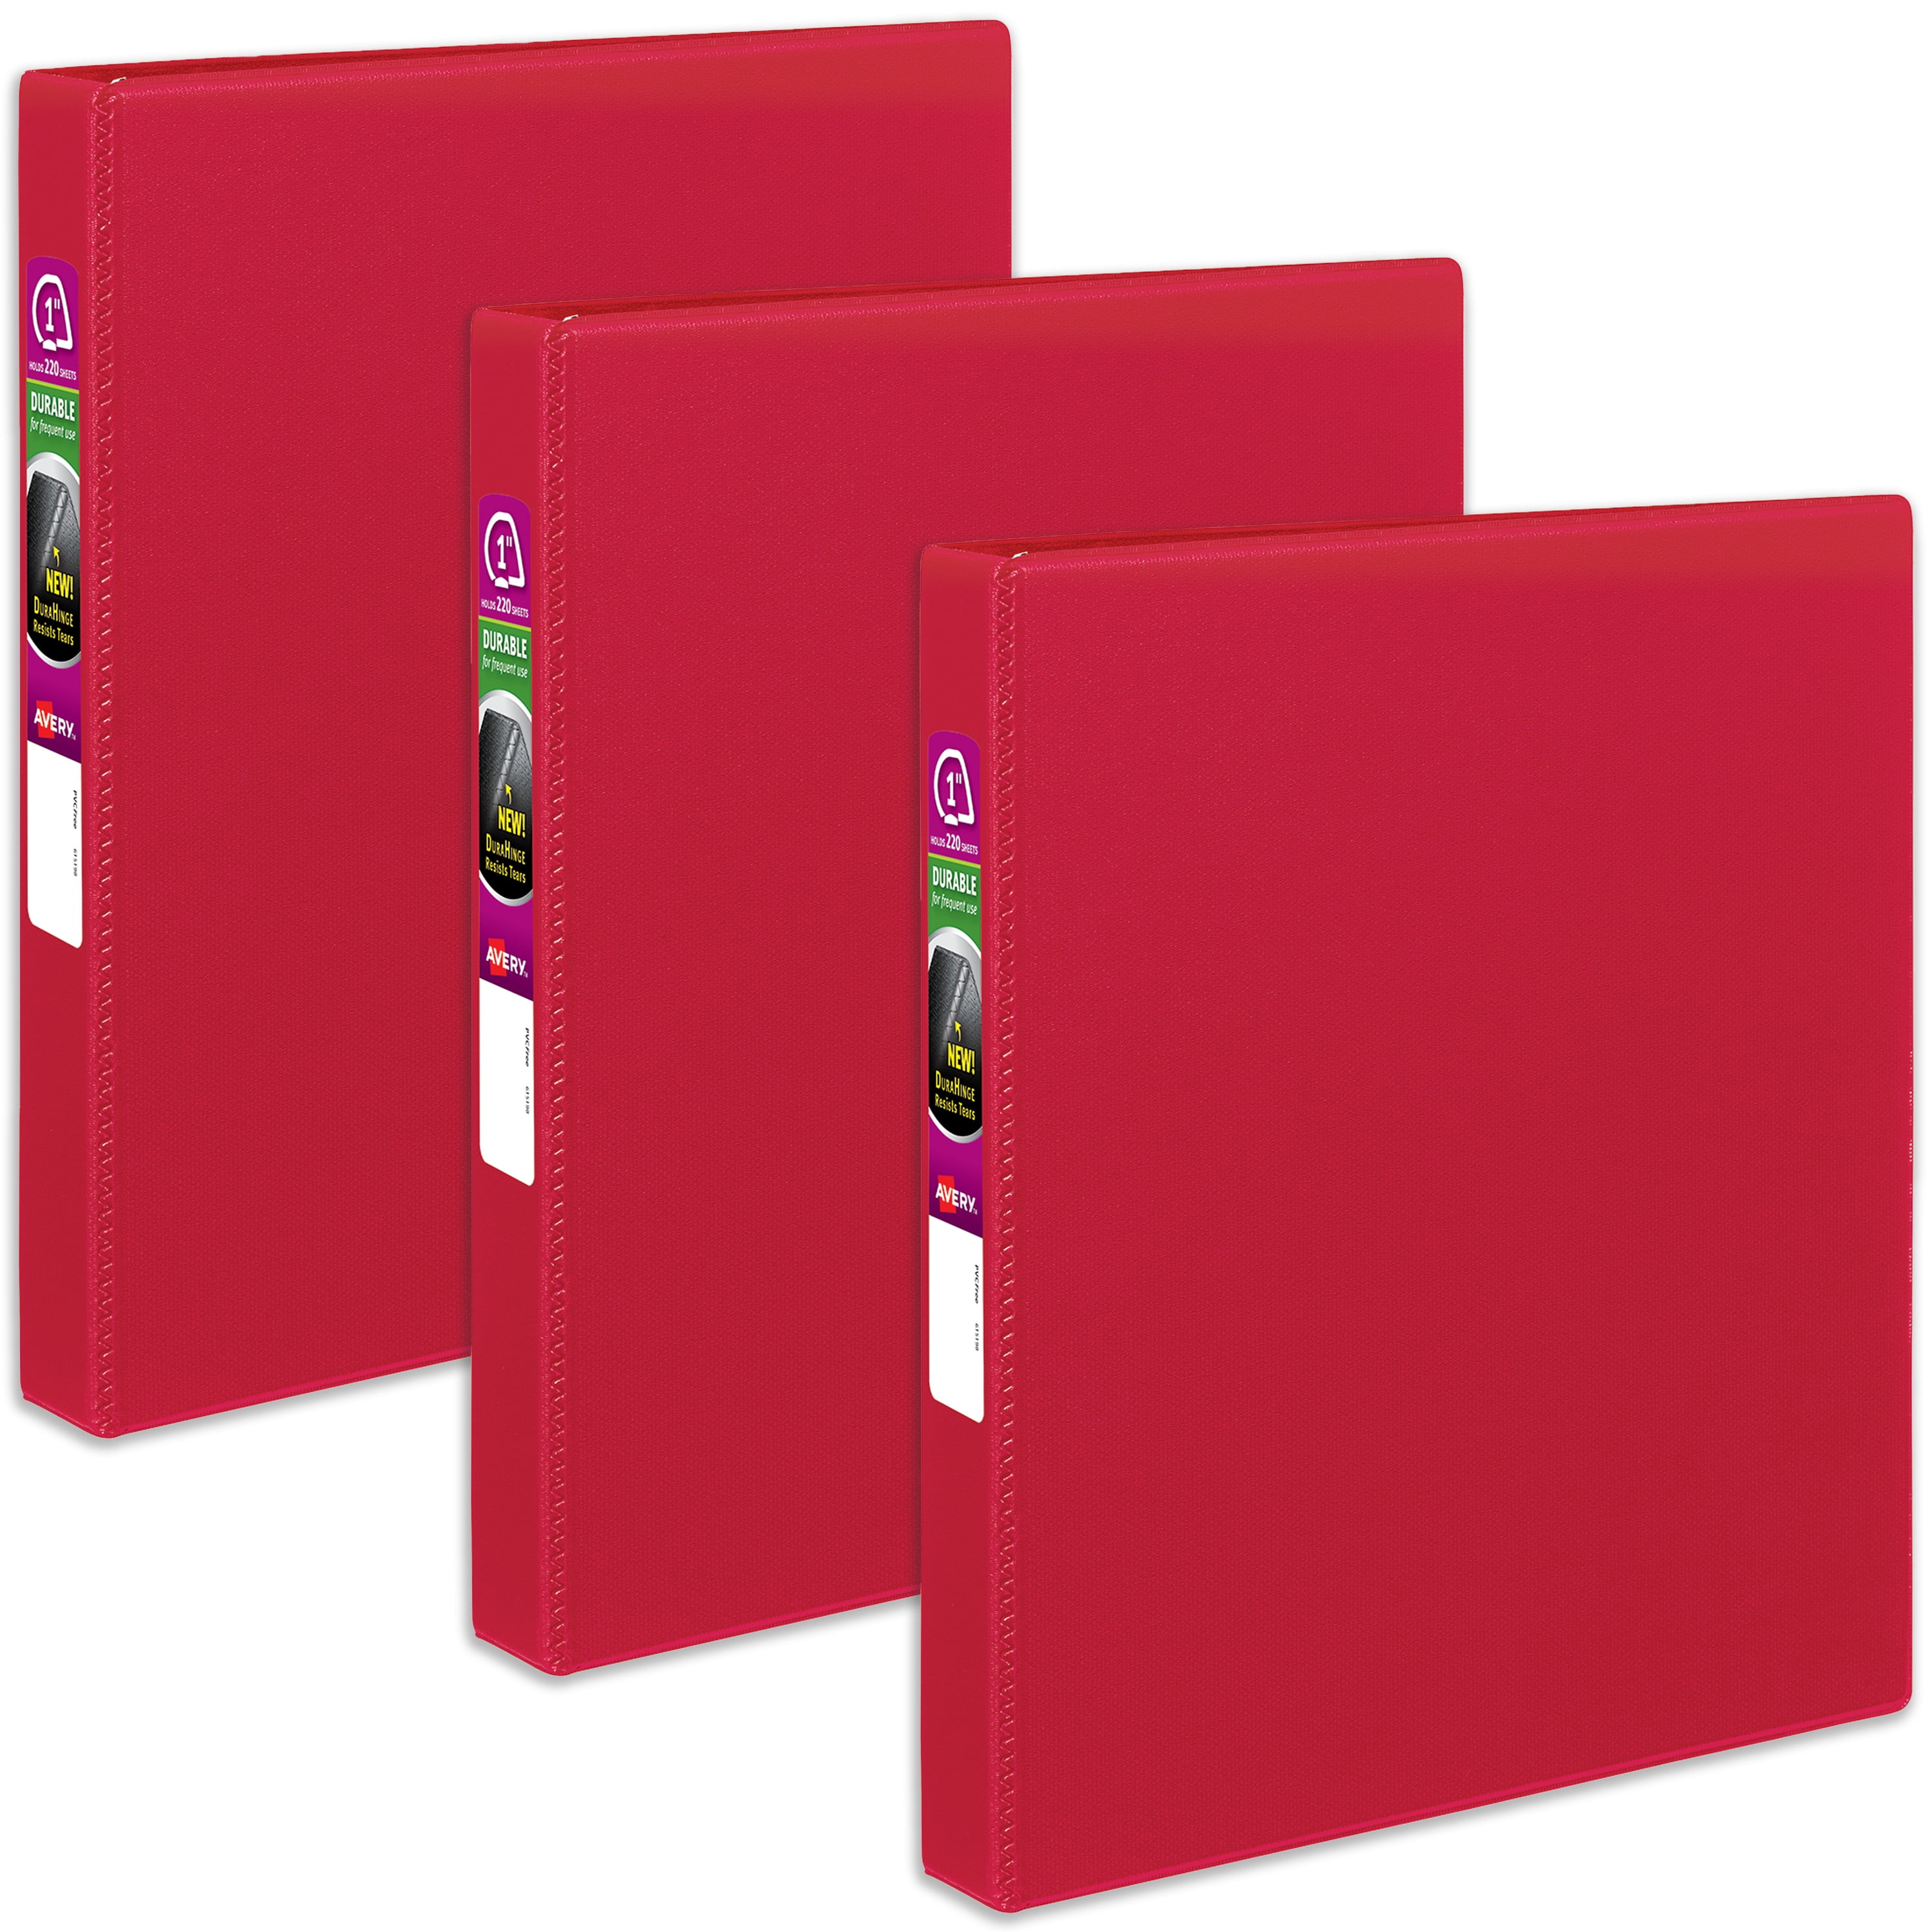 Avery 3-Ring Binder - Assorted, 1 in - Ralphs